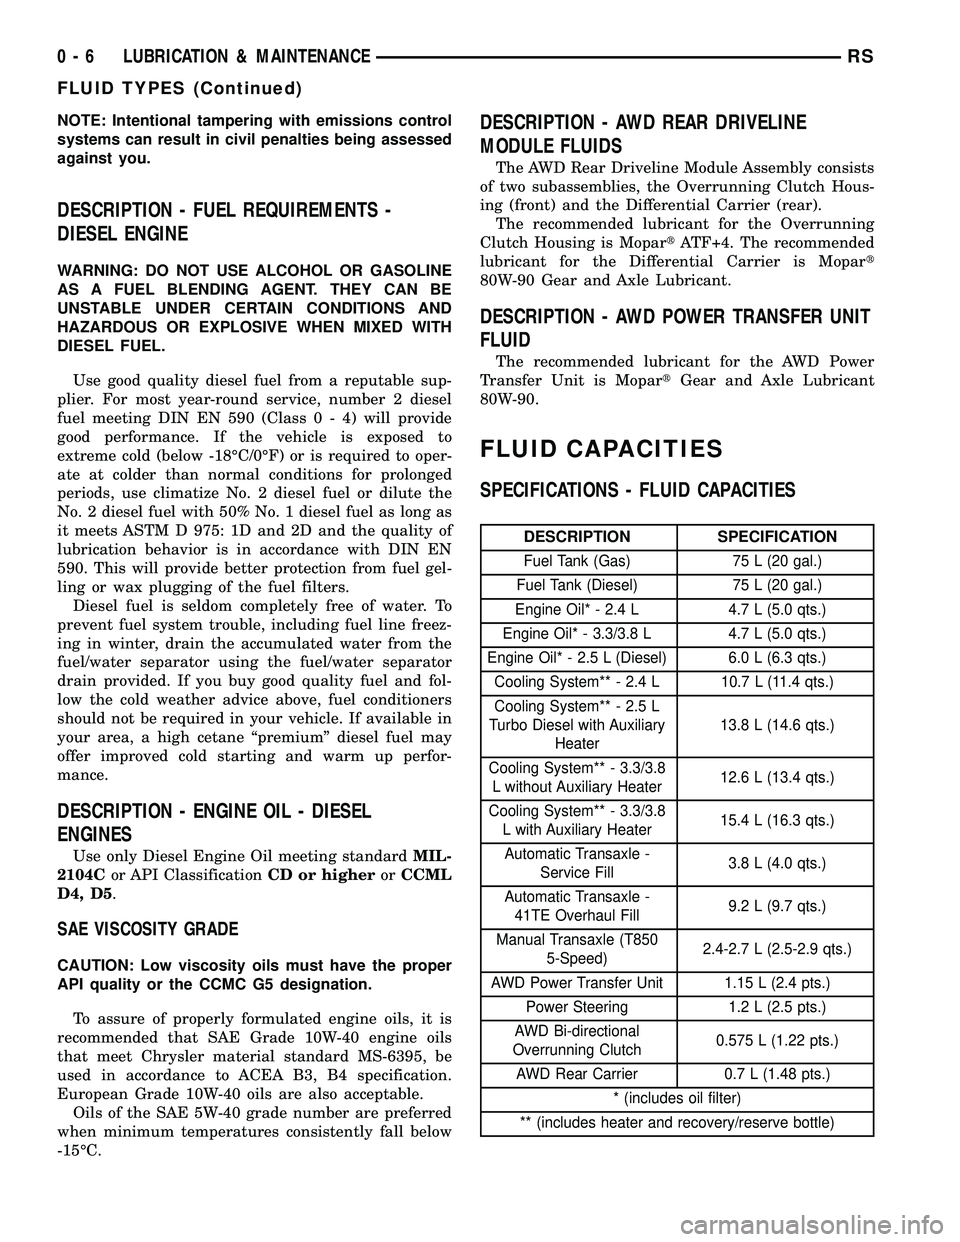 DODGE TOWN AND COUNTRY 2004 User Guide NOTE: Intentional tampering with emissions control
systems can result in civil penalties being assessed
against you.
DESCRIPTION - FUEL REQUIREMENTS -
DIESEL ENGINE
WARNING: DO NOT USE ALCOHOL OR GASO